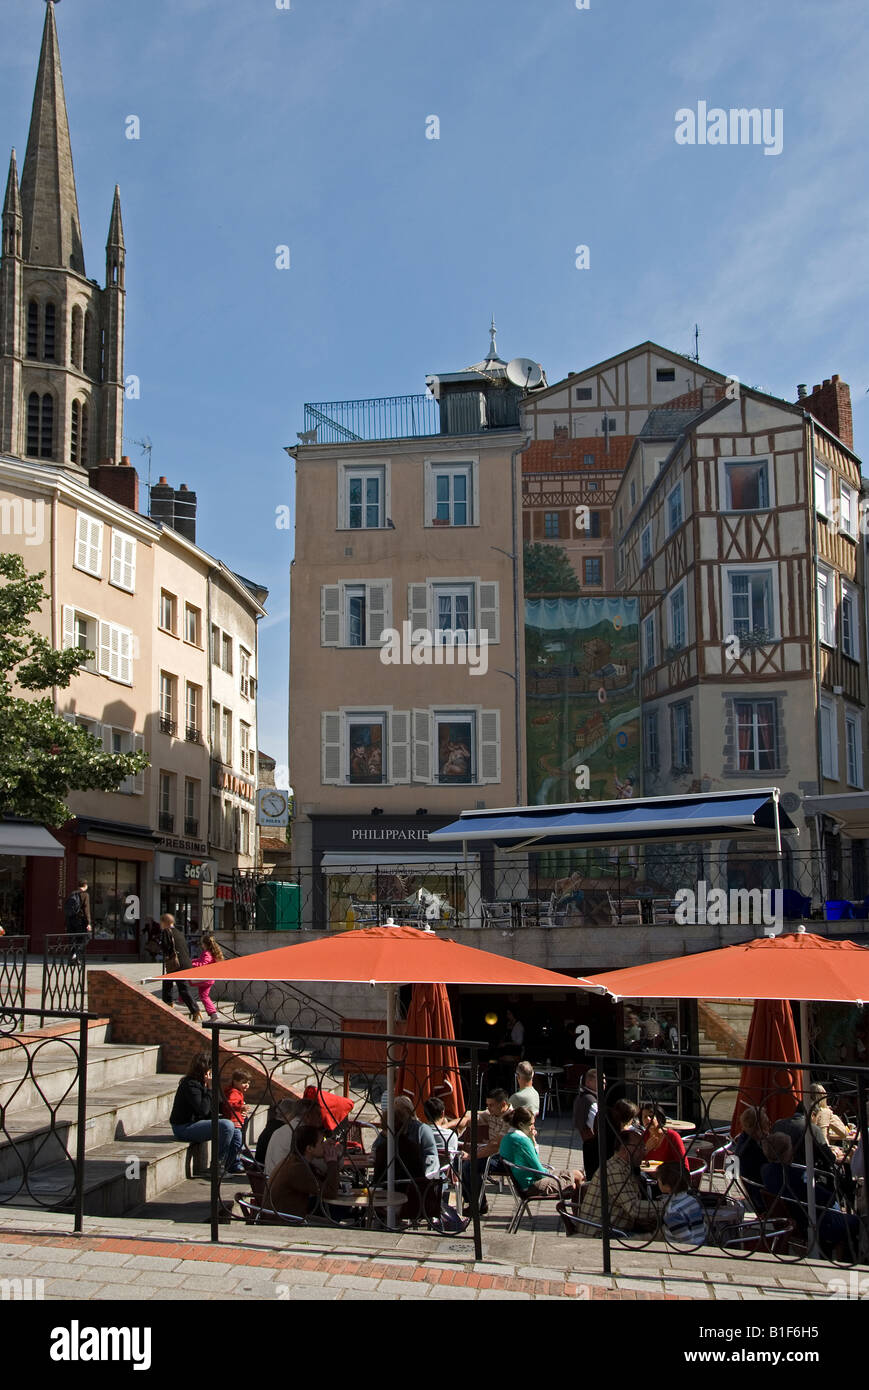 Stock photo of a street scene in Limoges france Stock Photo - Alamy